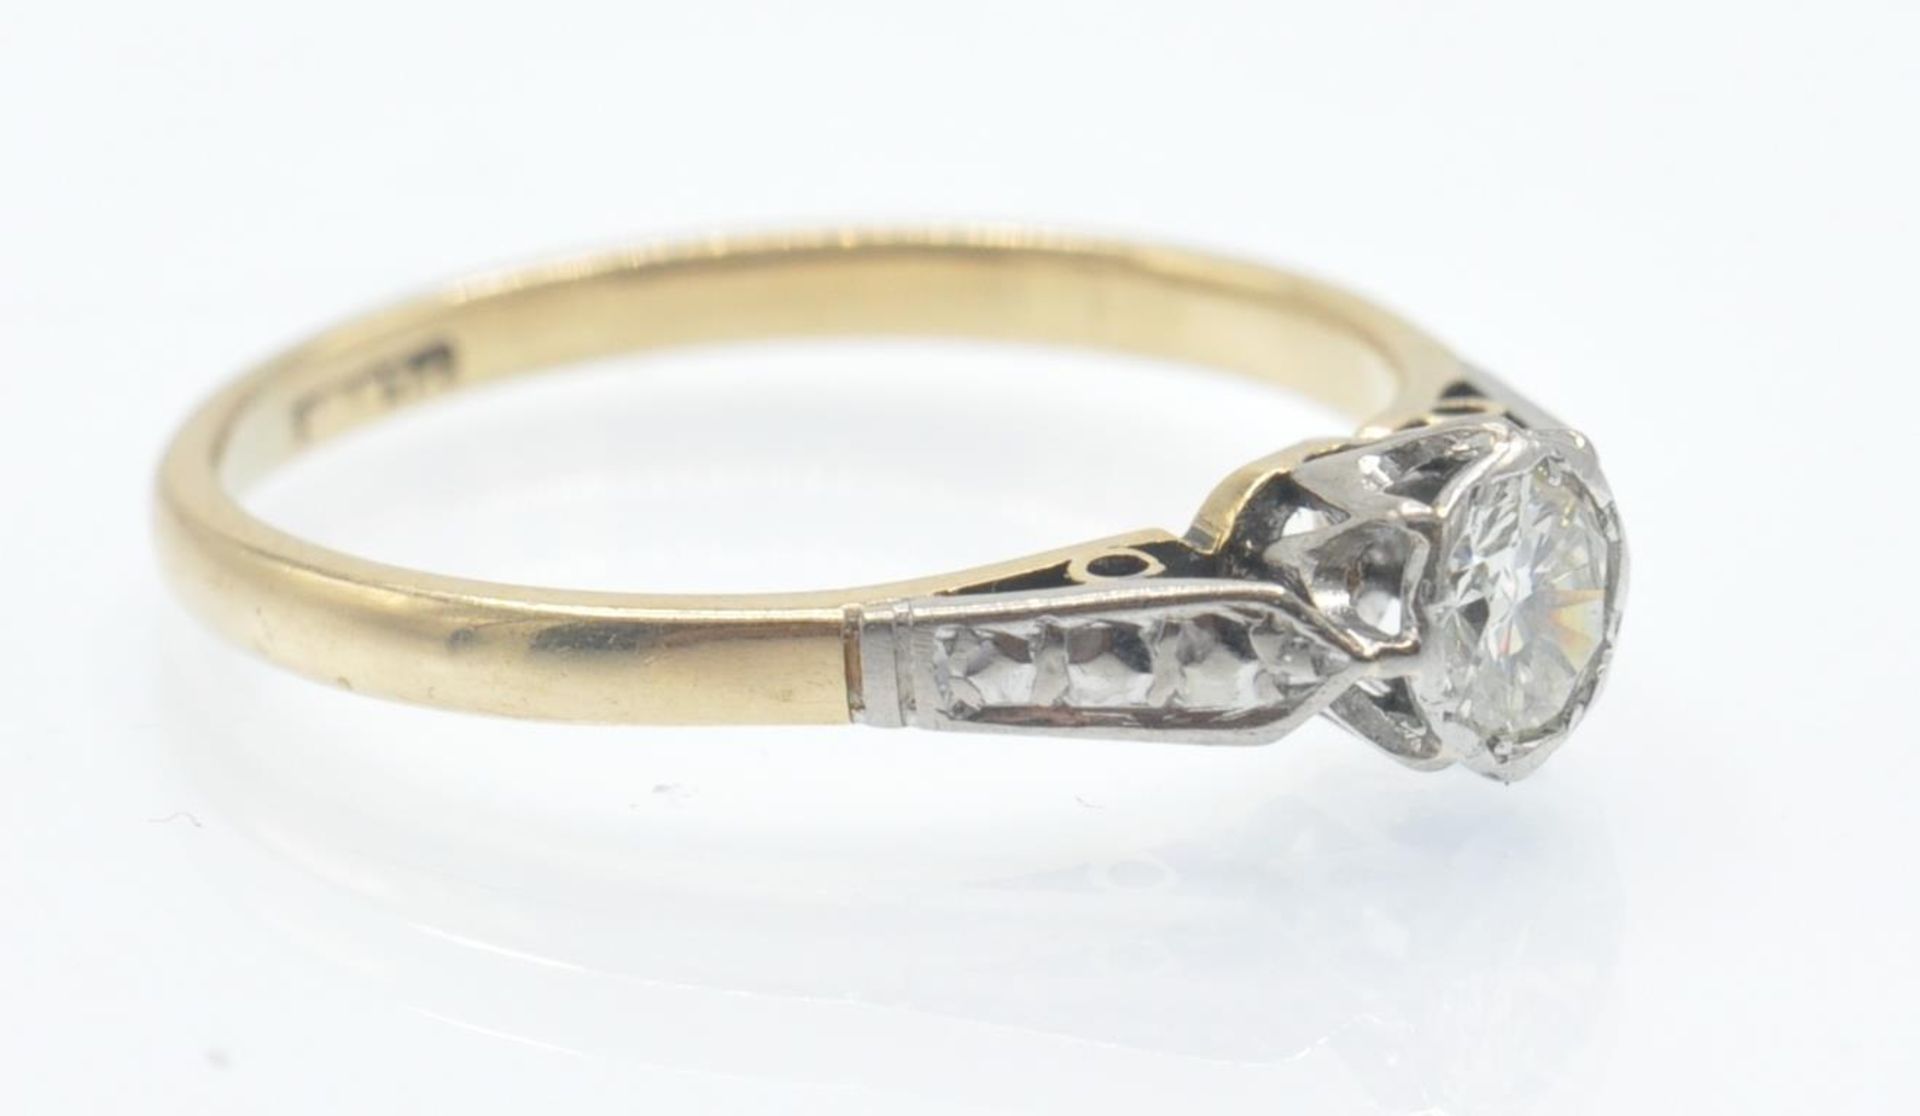 A Vintage 18ct Gold & Platinum Solitaire Diamond Ring - Image 2 of 5